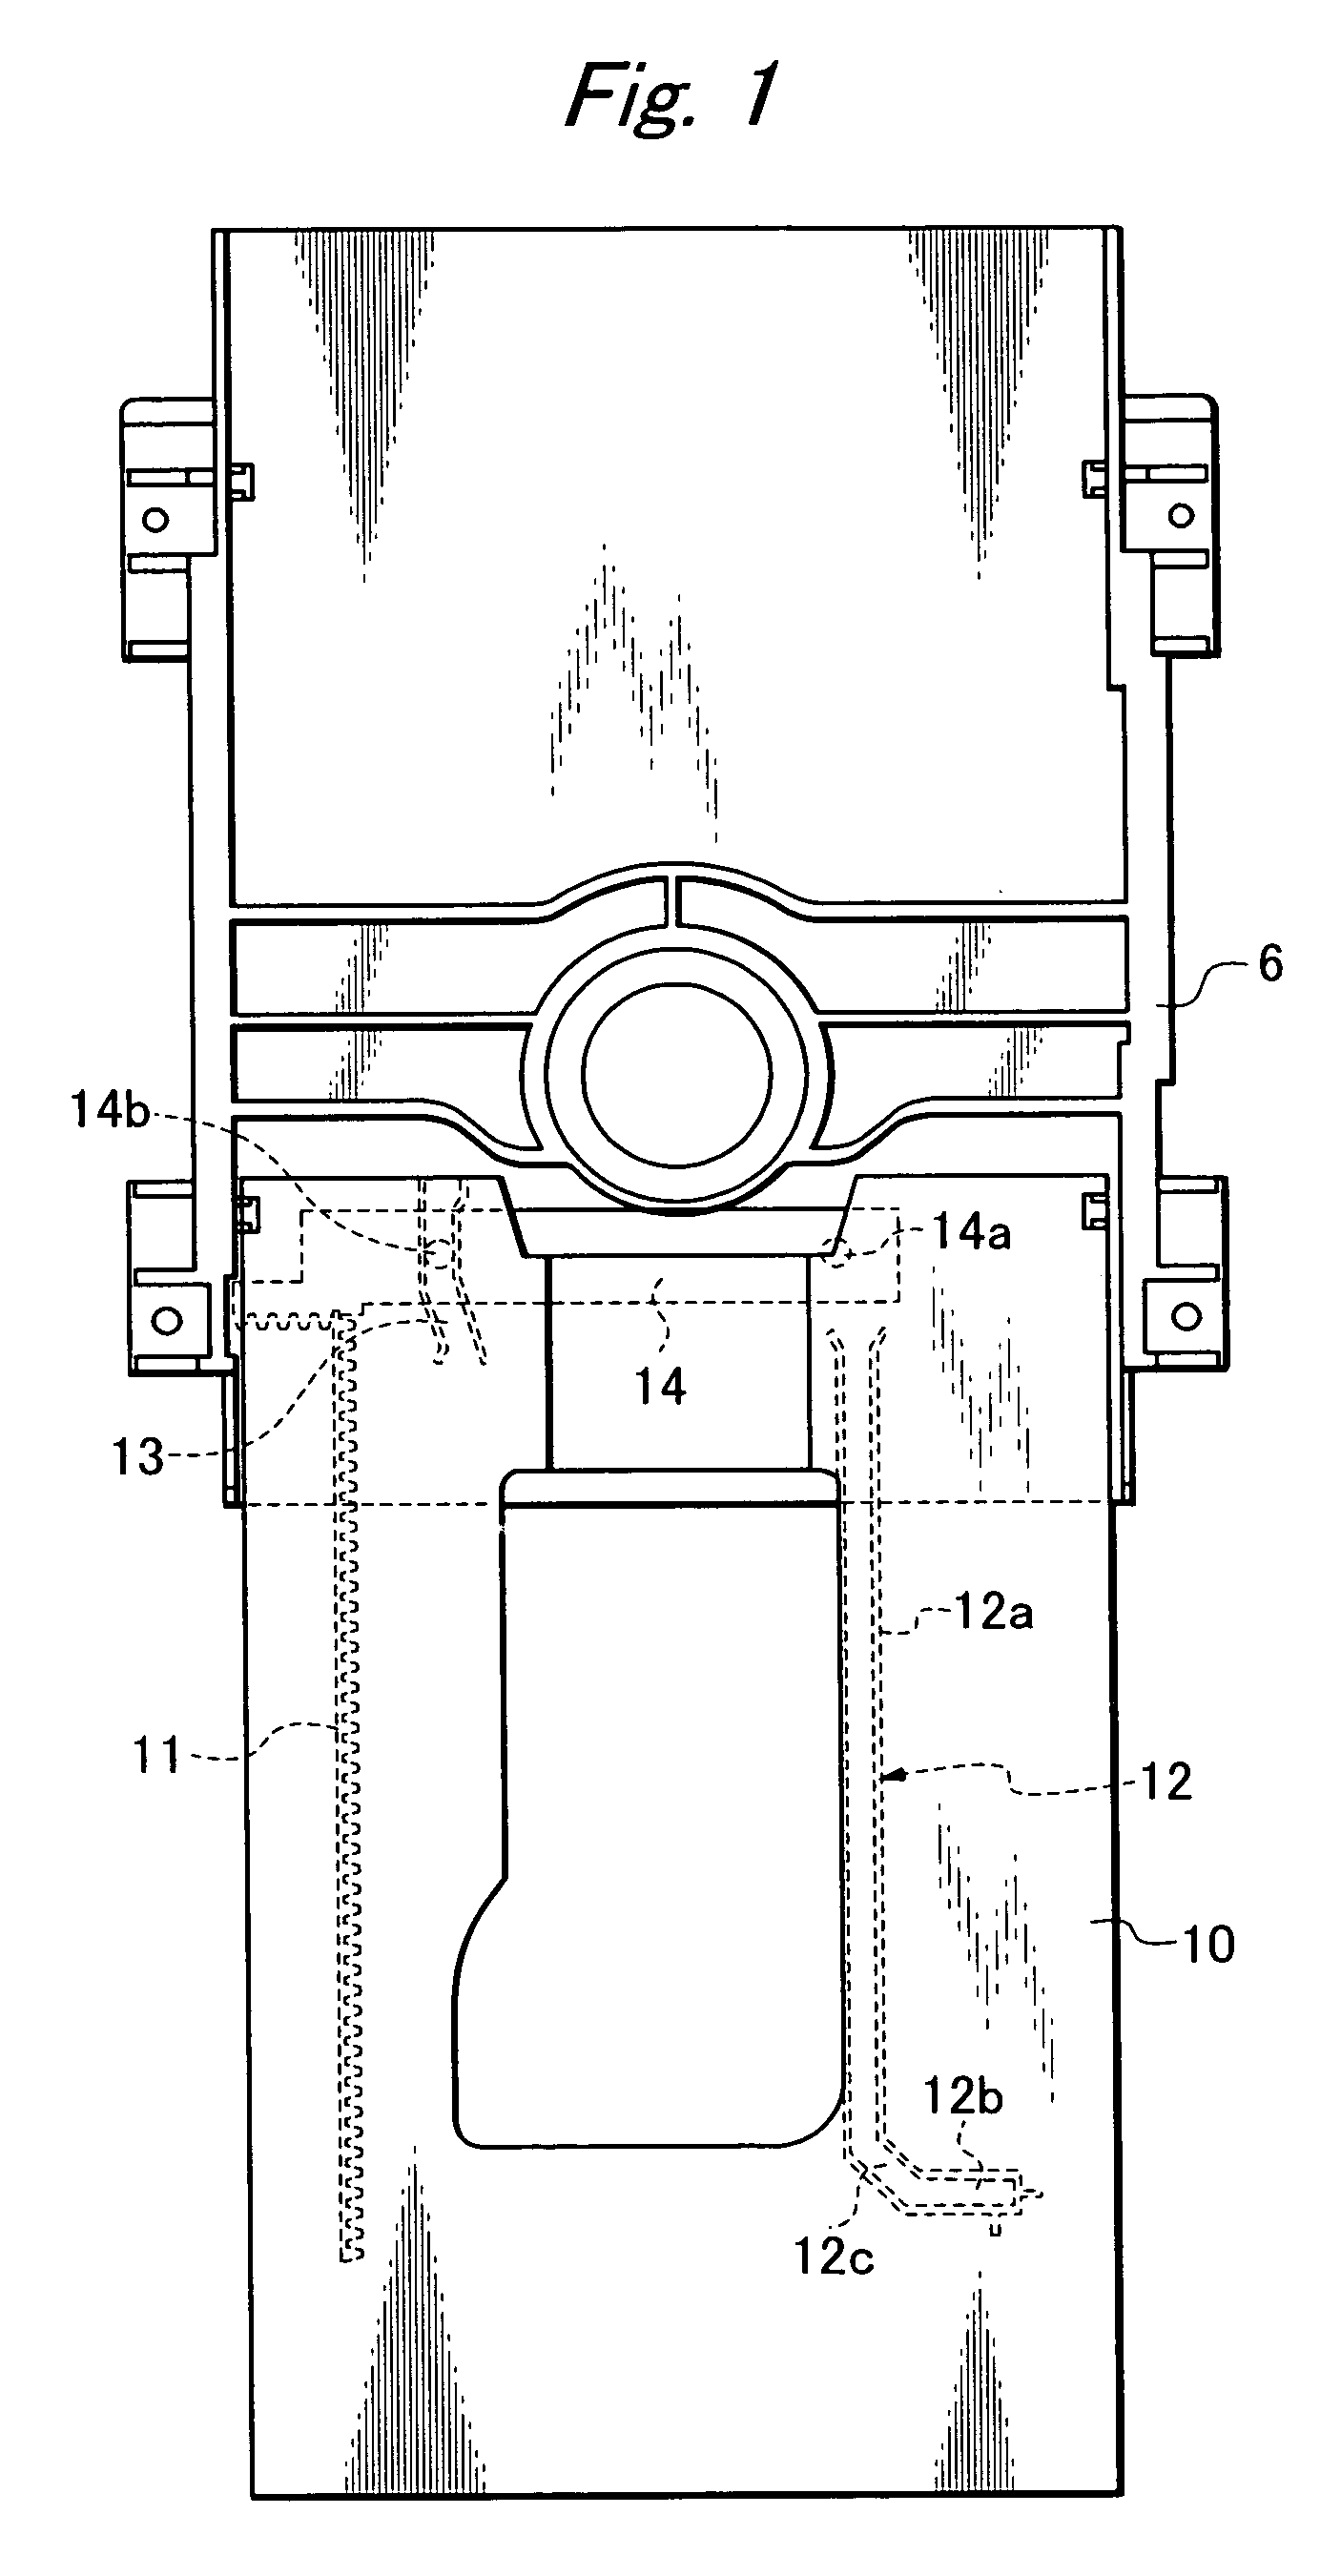 Disk drive having mechanism for preventing tray from rolling